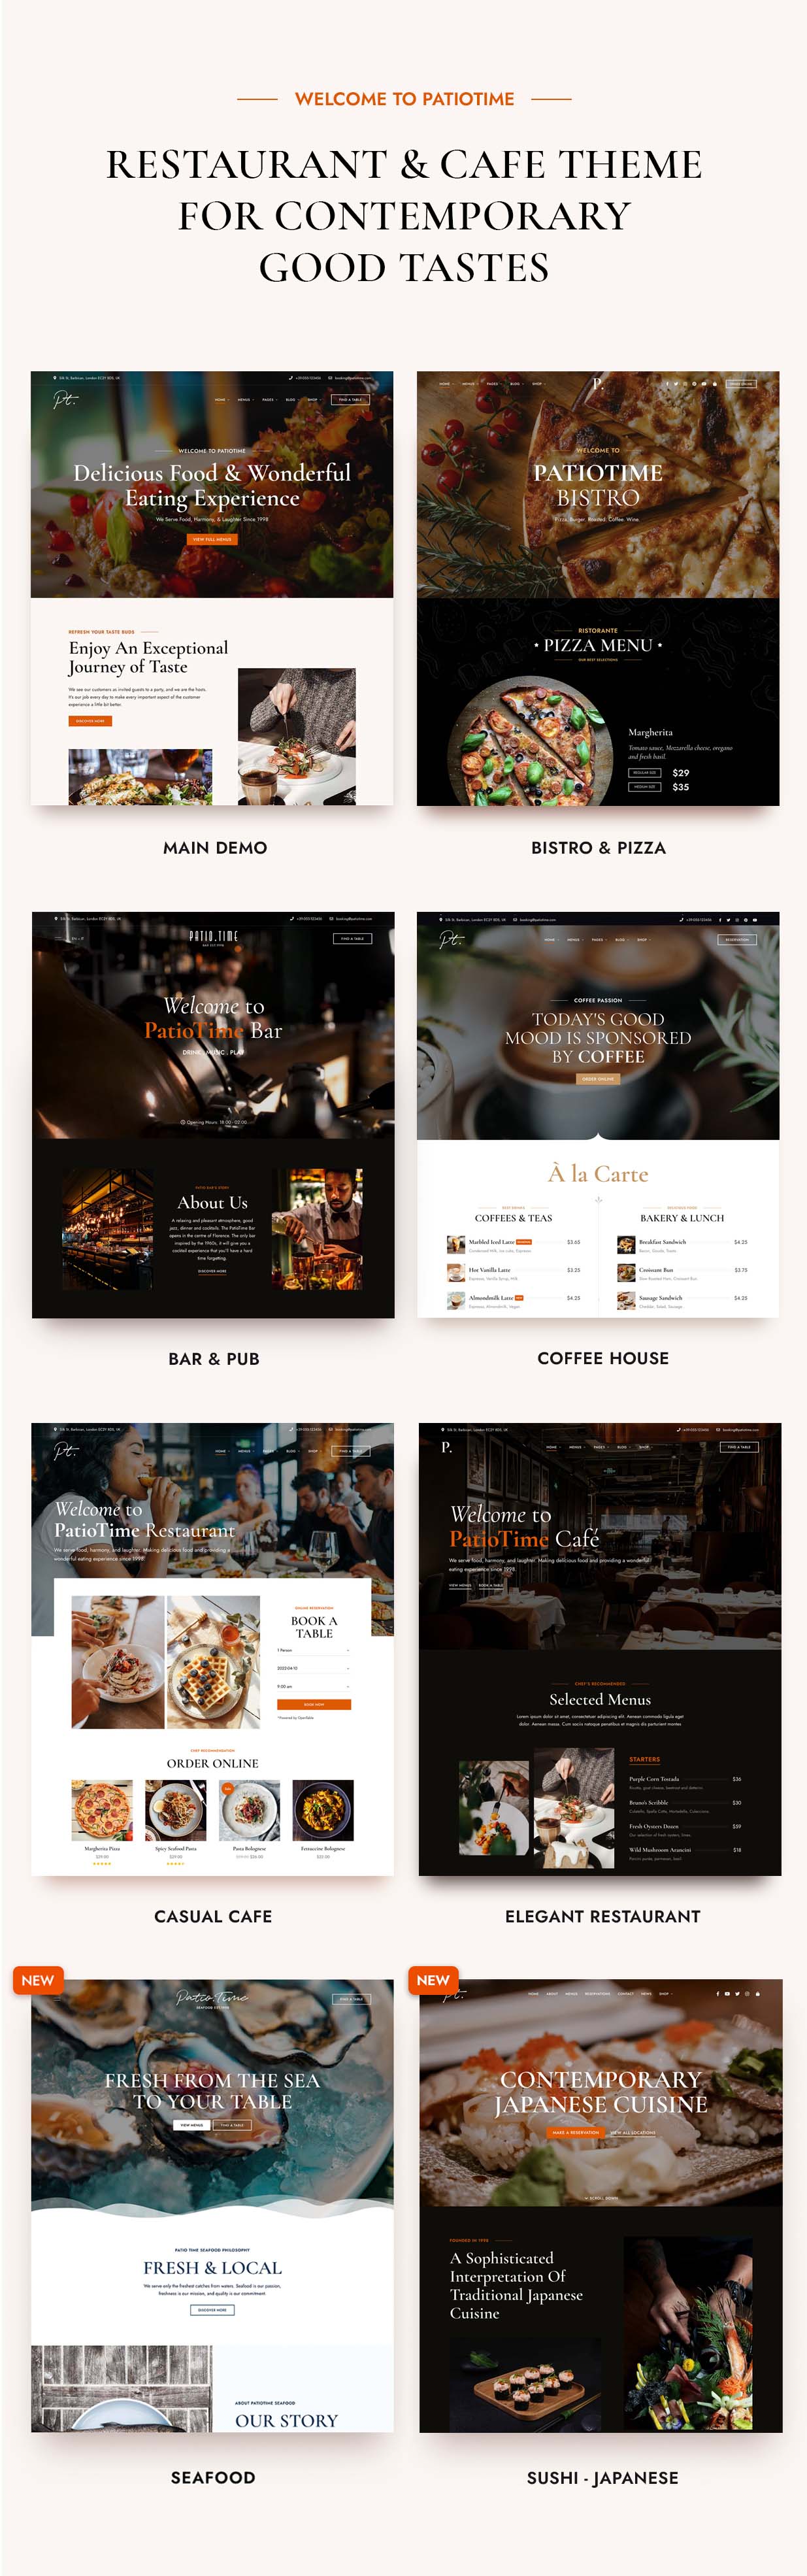 Restaurant and cafe theme for contemporary good tastes.